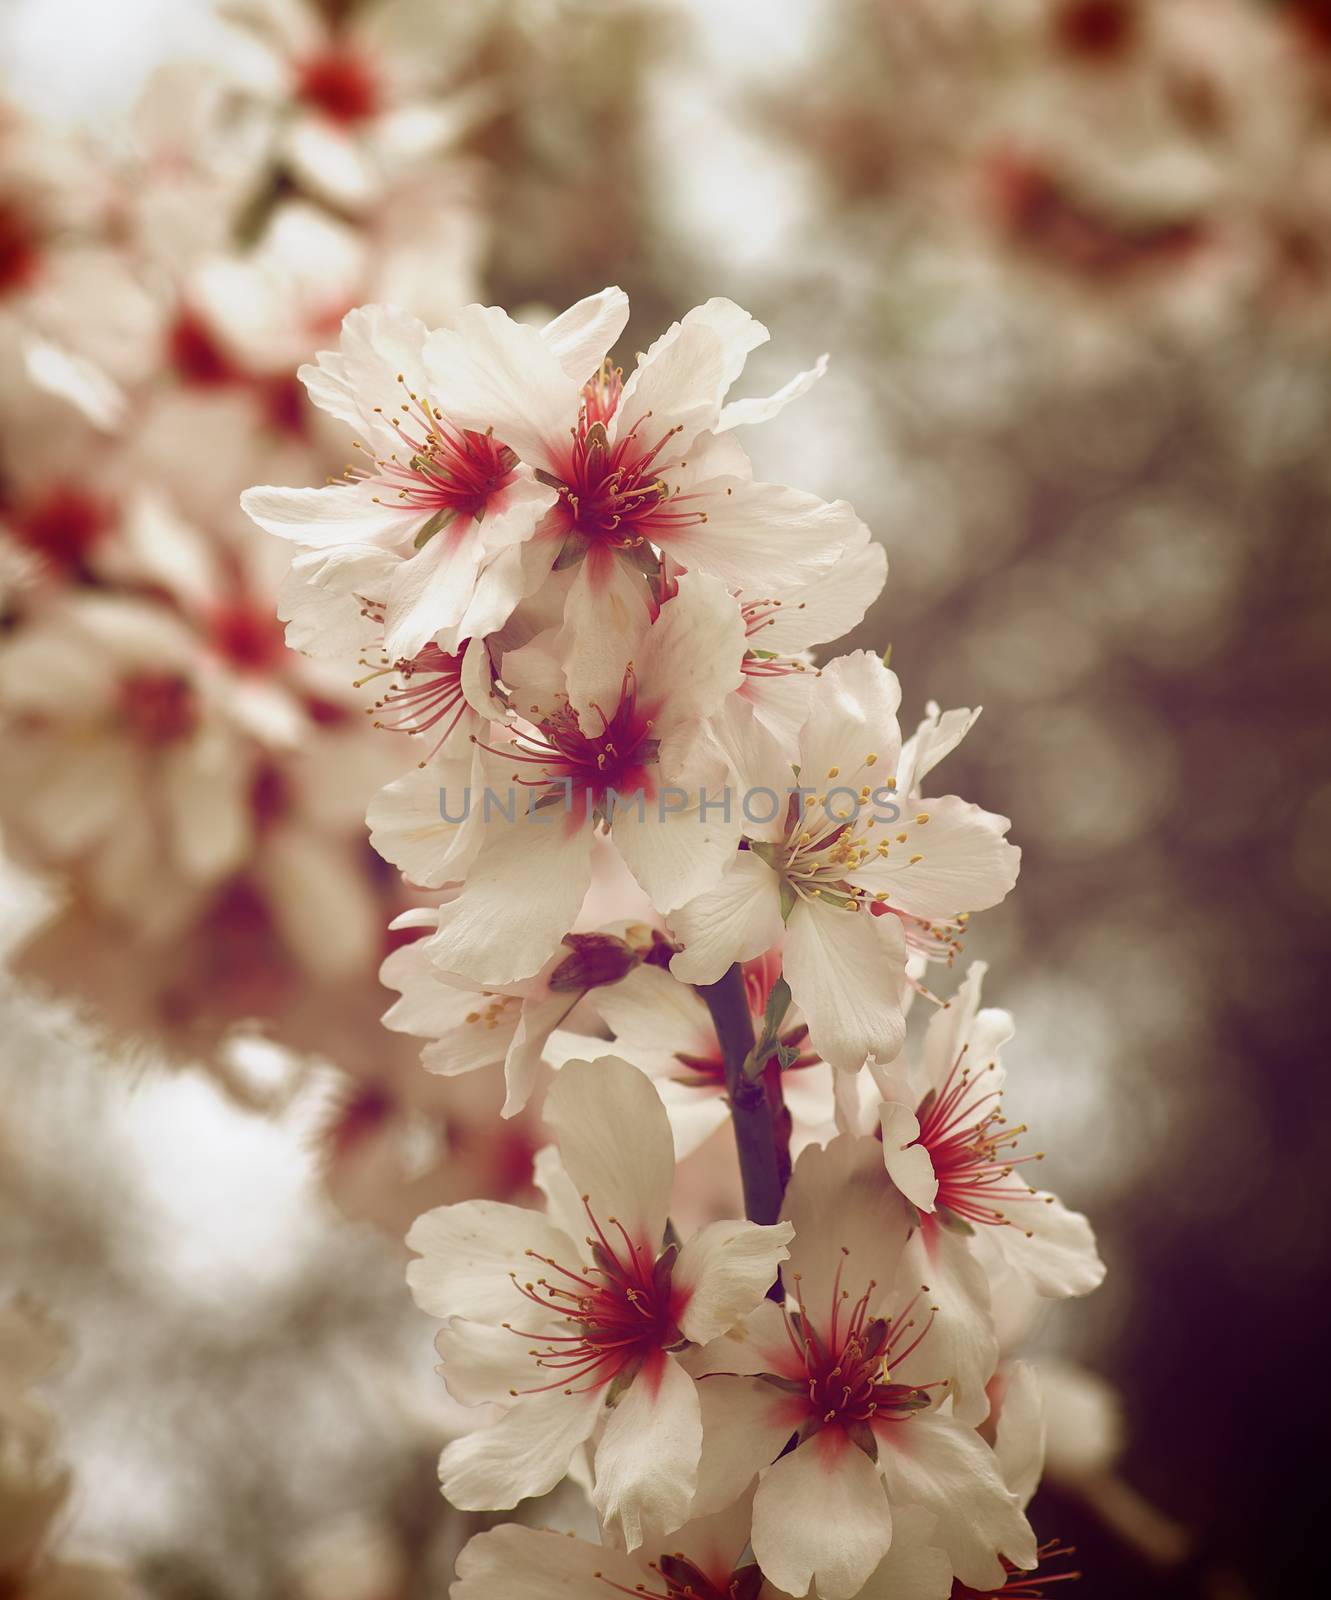 Beauty Pink and White Cherry Blossom Branch on Blurred Cherry Tree Flowers closeup. Retro Styled